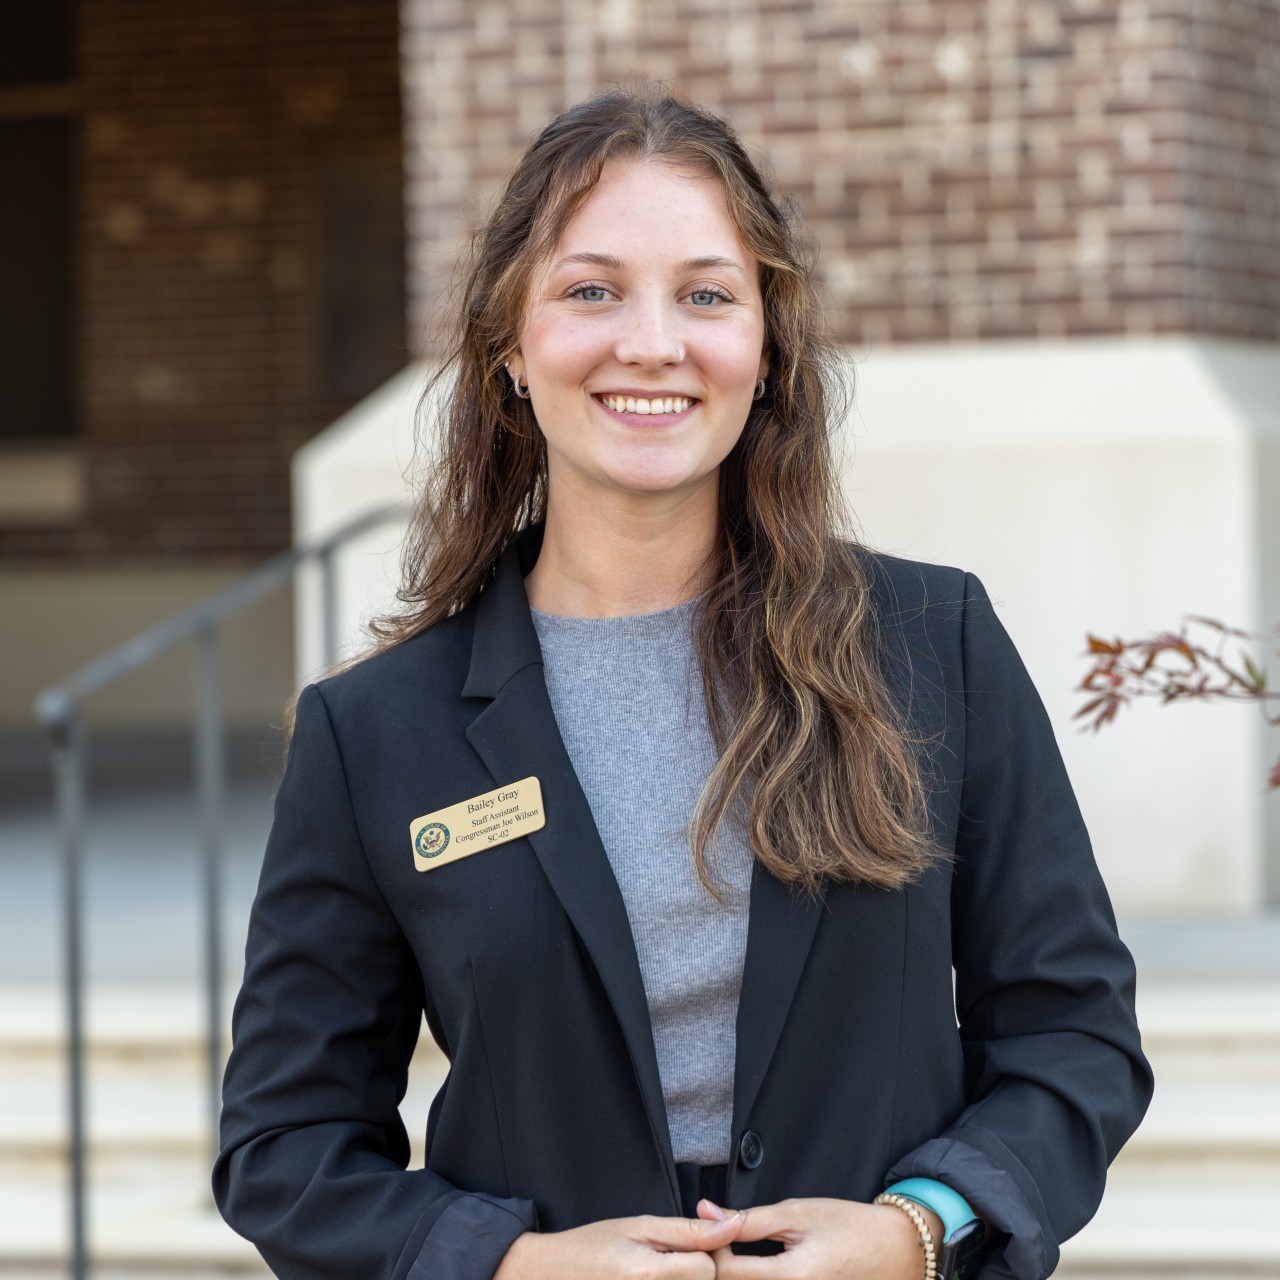 Bailey Gray is applying the skills she developed at USC Aiken to her new role as special assistant in the office of U.S. Rep. Joe Wilson. 